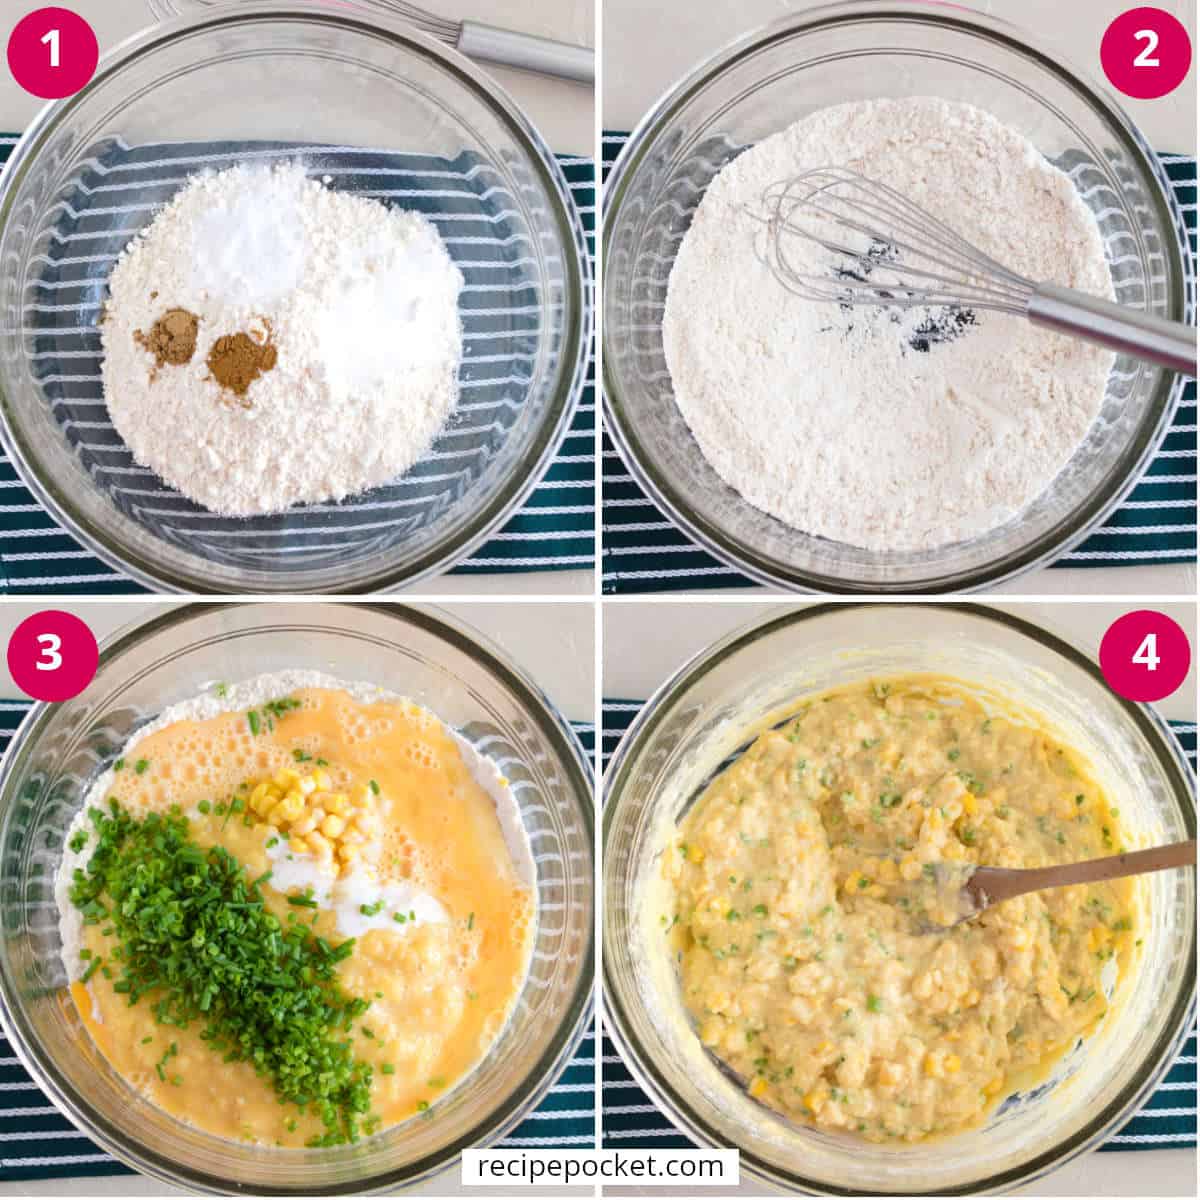 A four part image showing steps for making sweet corn fritters.